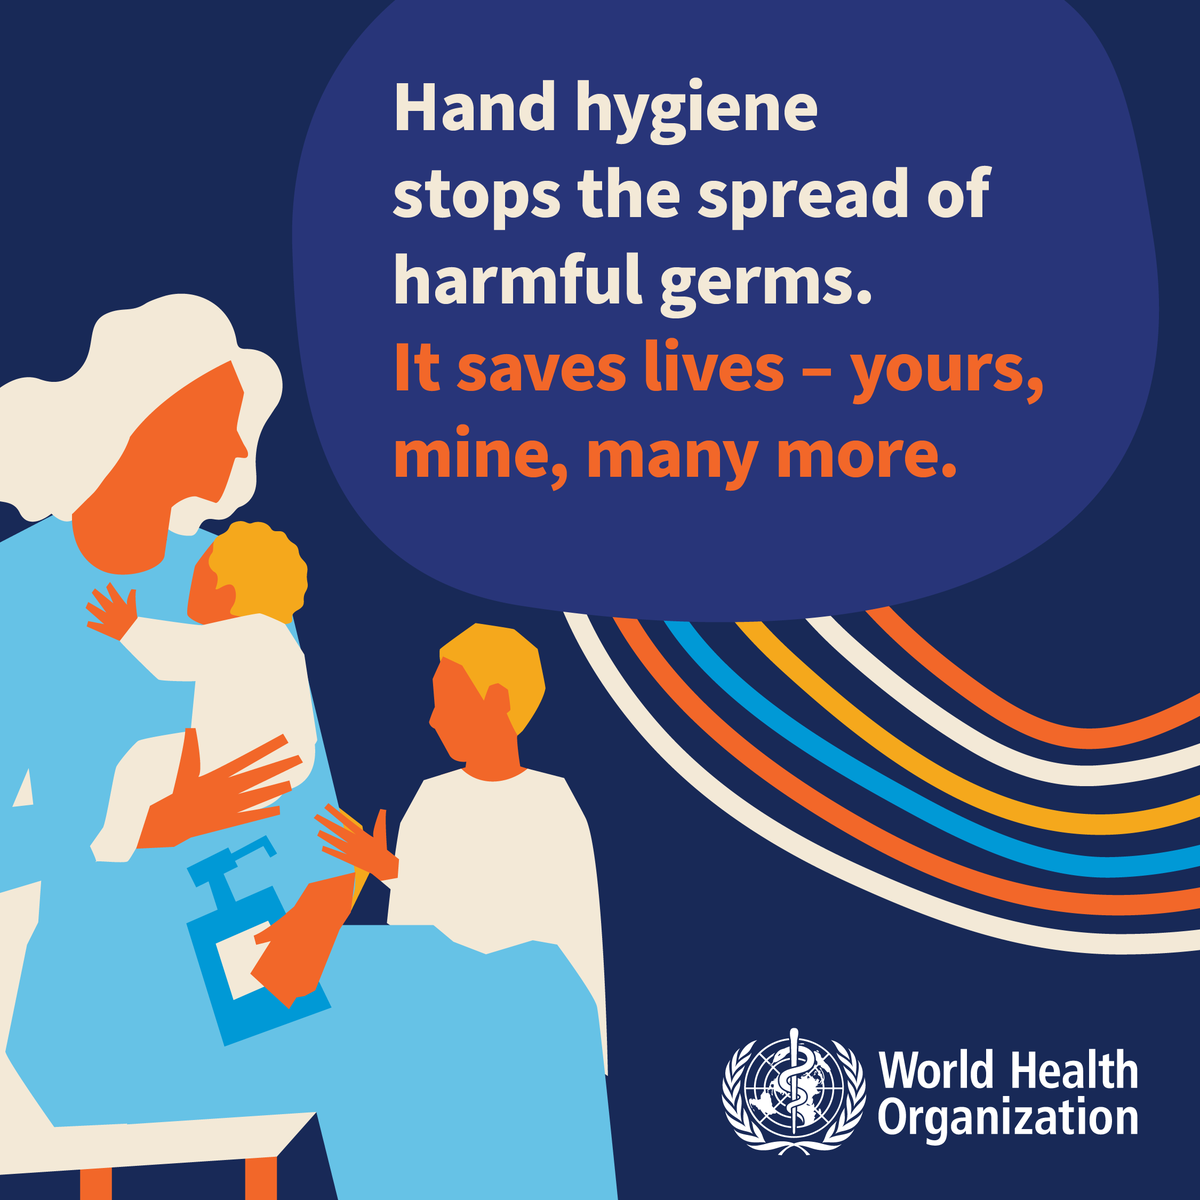 Today is World Hand Hygiene Day. Today, and every day, please remember to clean your hands regularly. If you don’t have access to soap and water, use hand sanitizer. Good hand hygiene helps to protect us from illness by preventing the spread of germs. #CleanHandsSaveLives